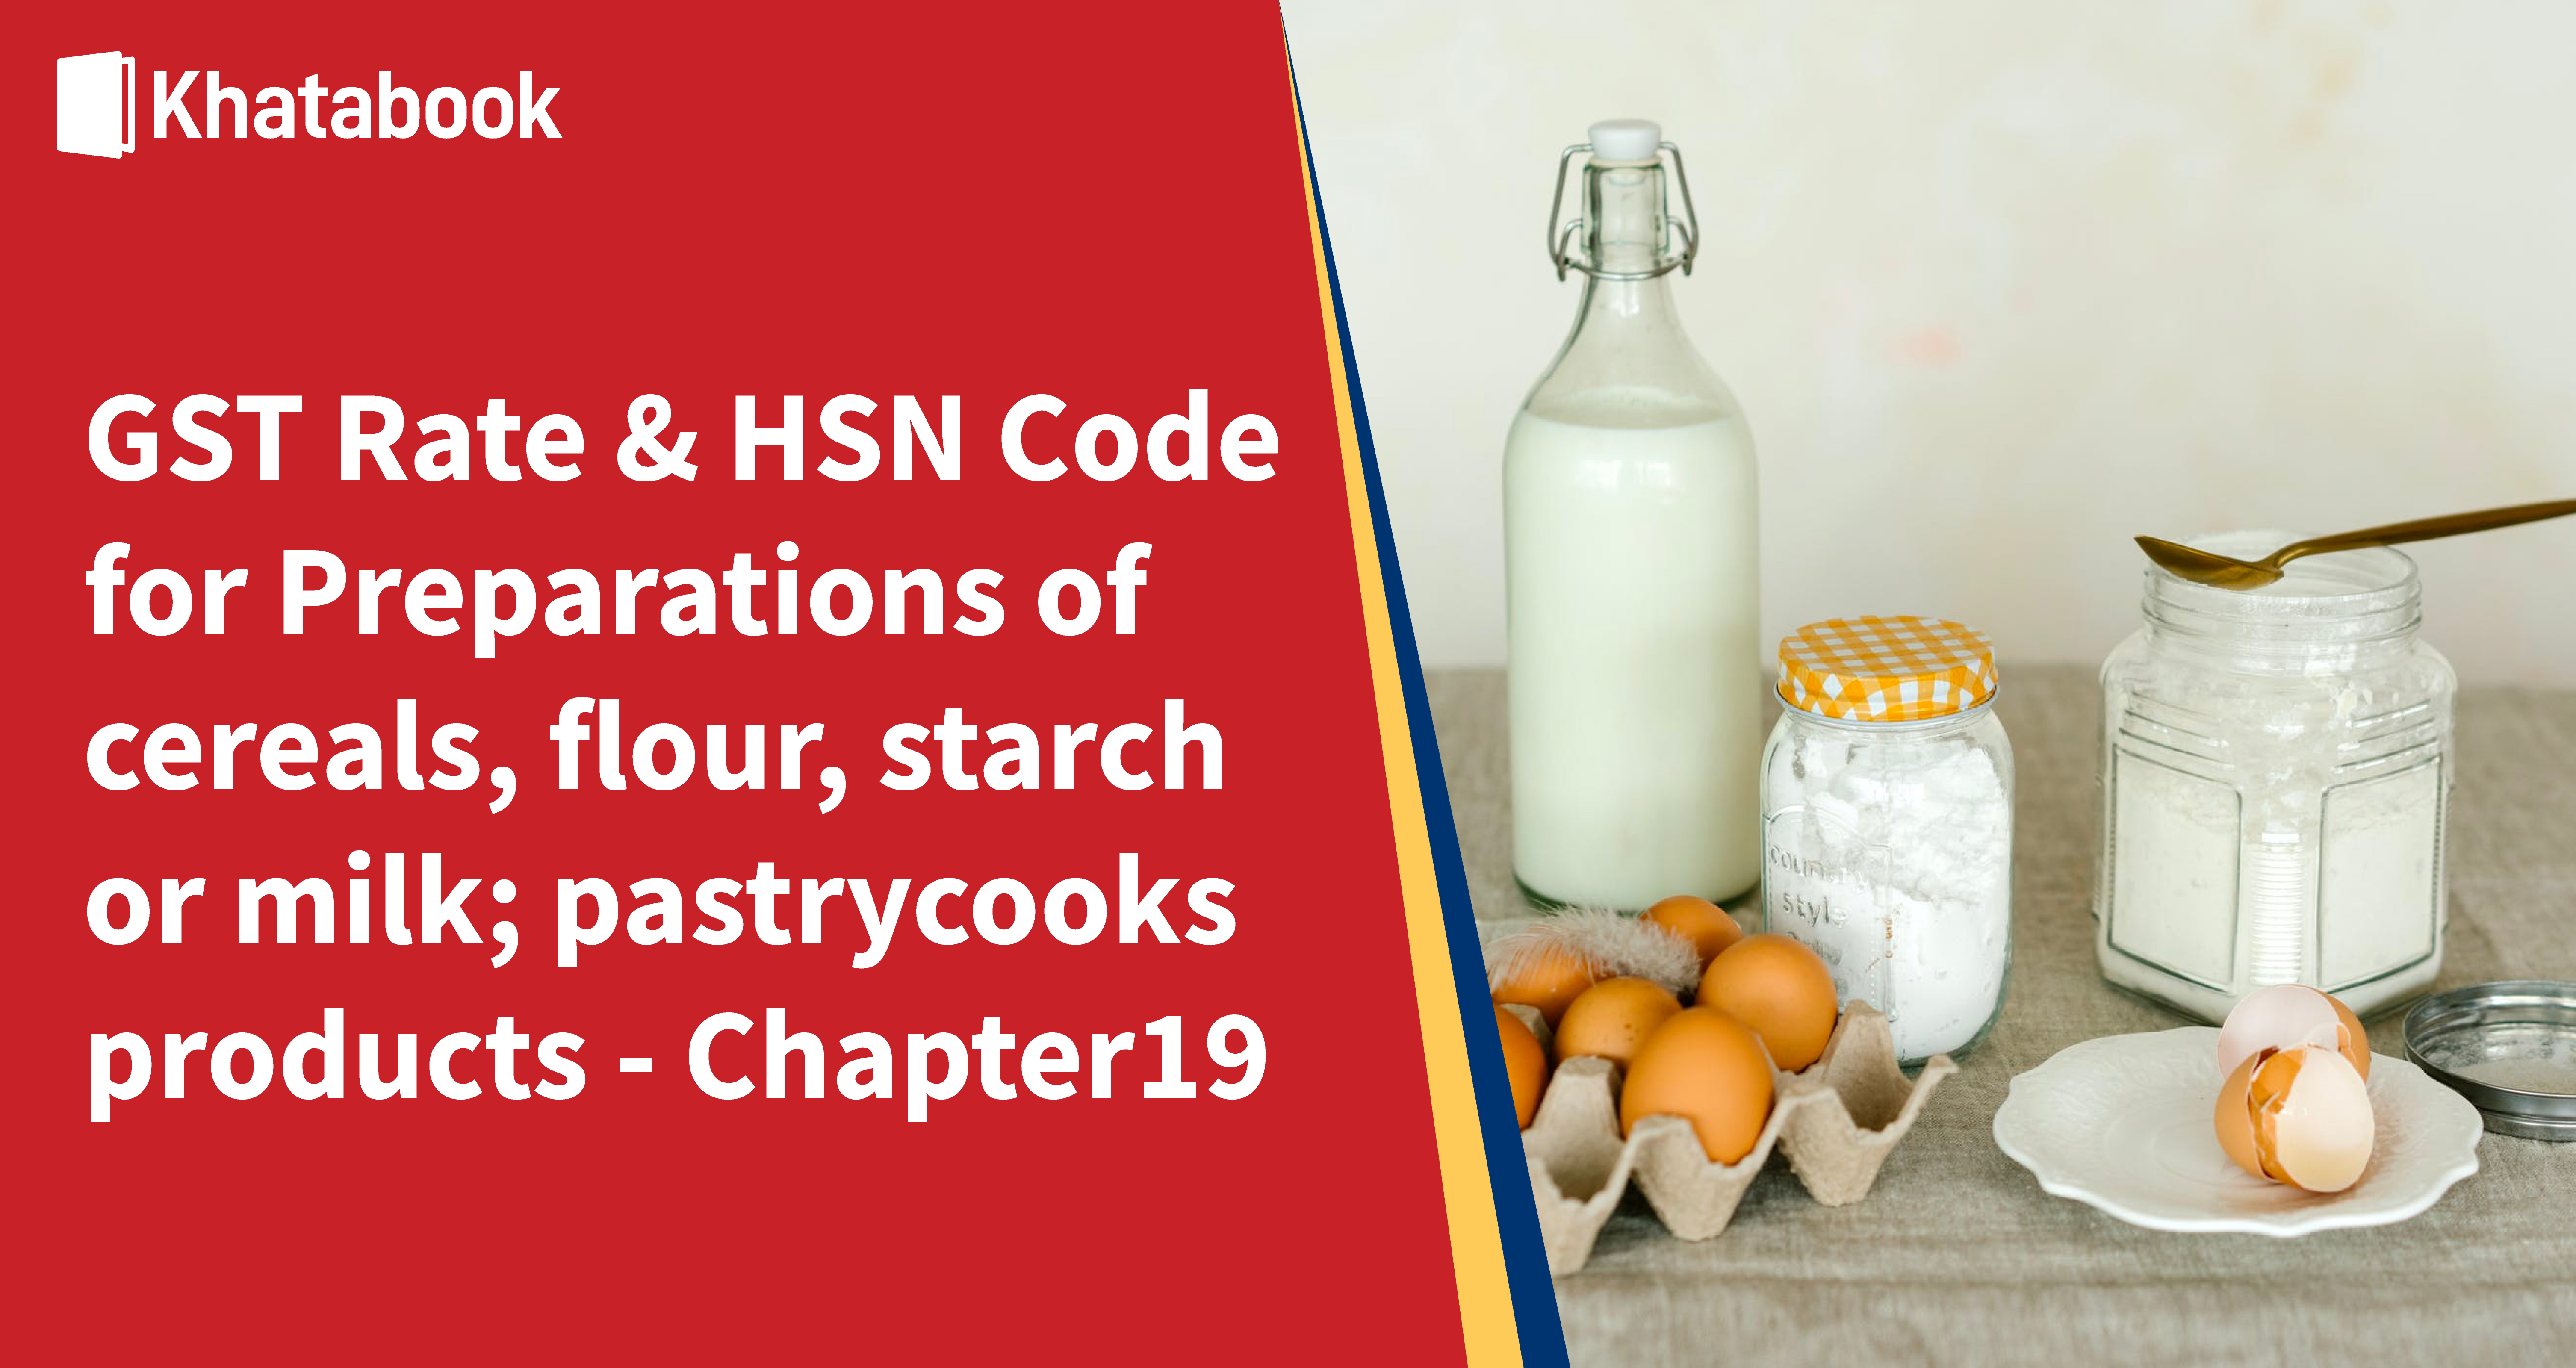 hsn code for bakery products